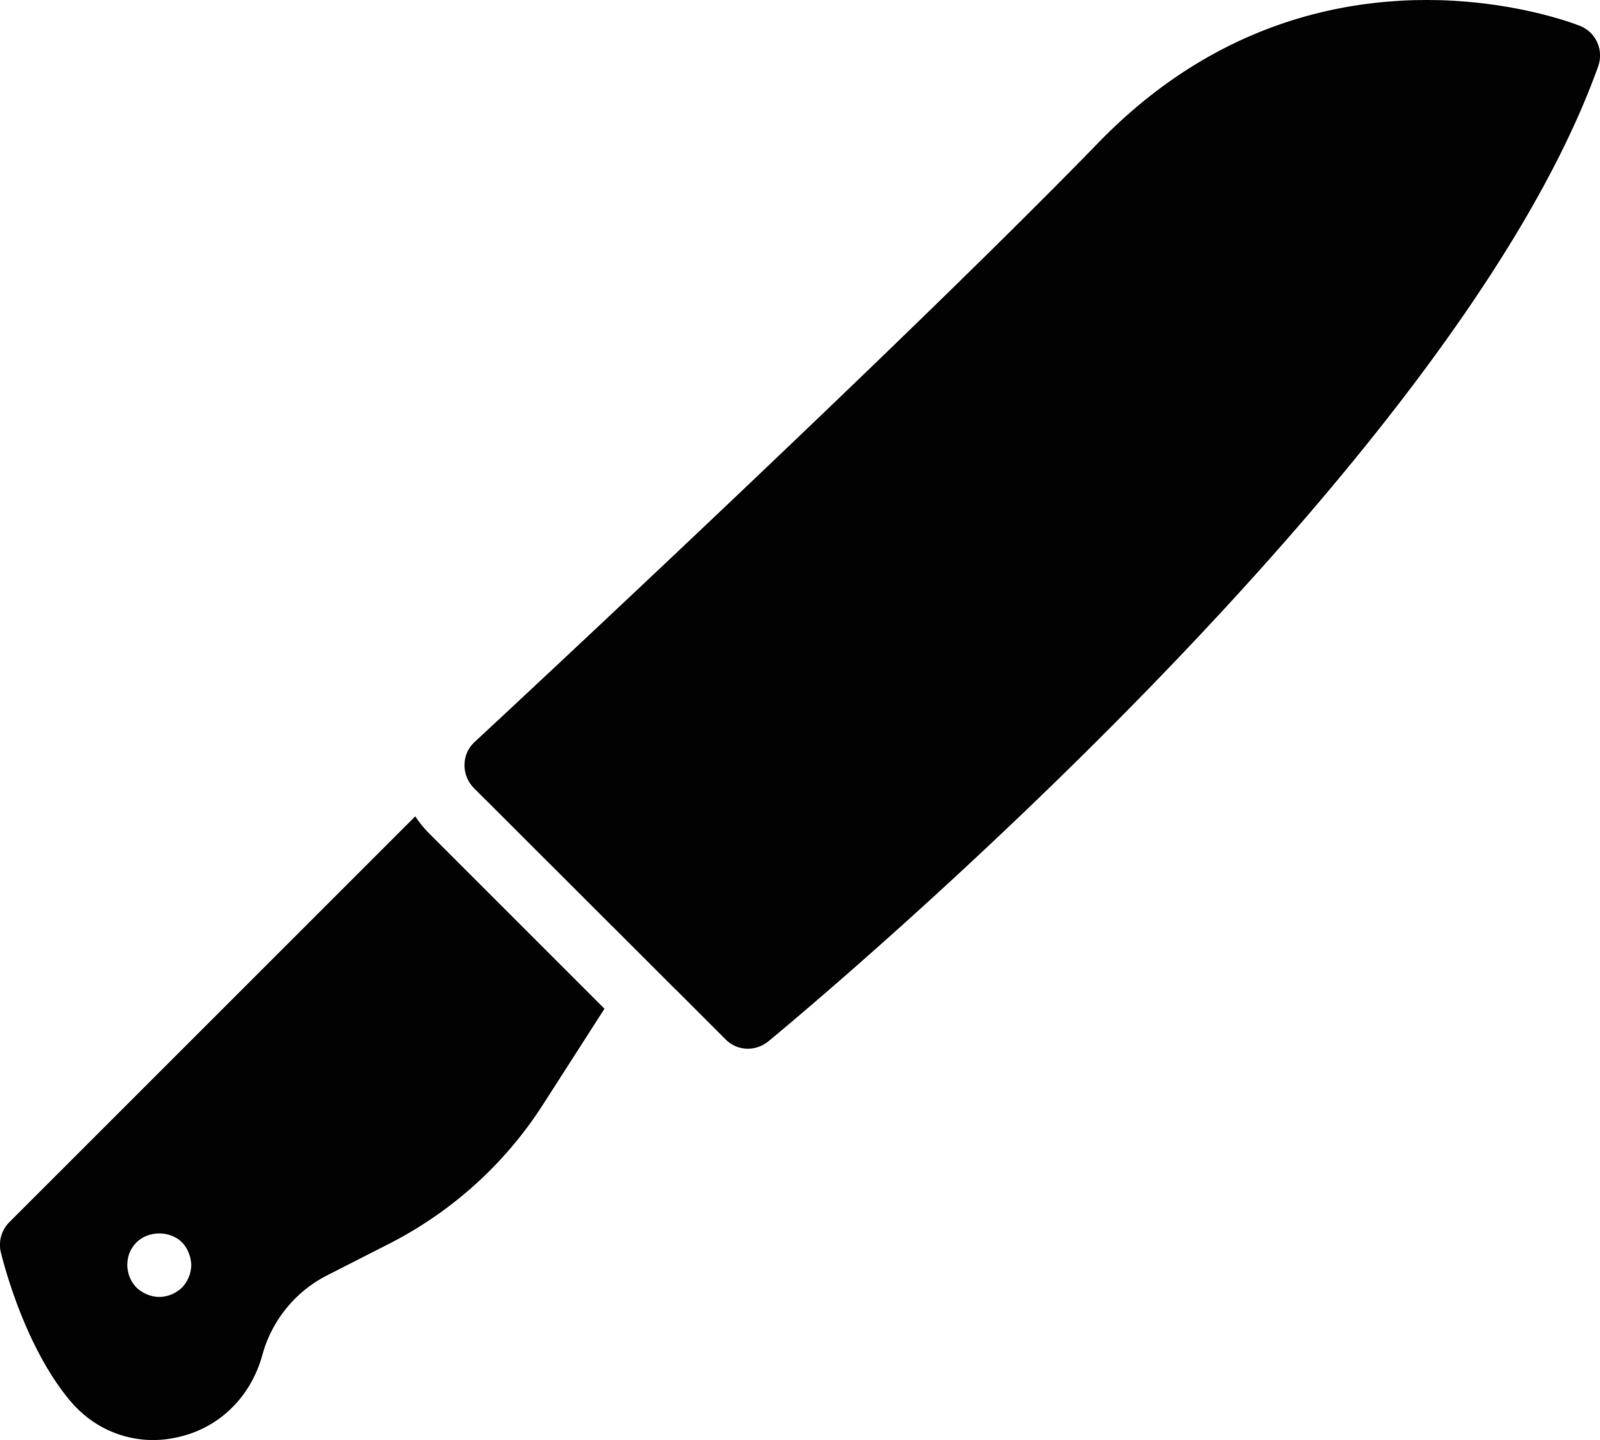 knife Vector illustration on a transparent background. Premium quality symbols. Gyliph vector icon for concept and graphic design